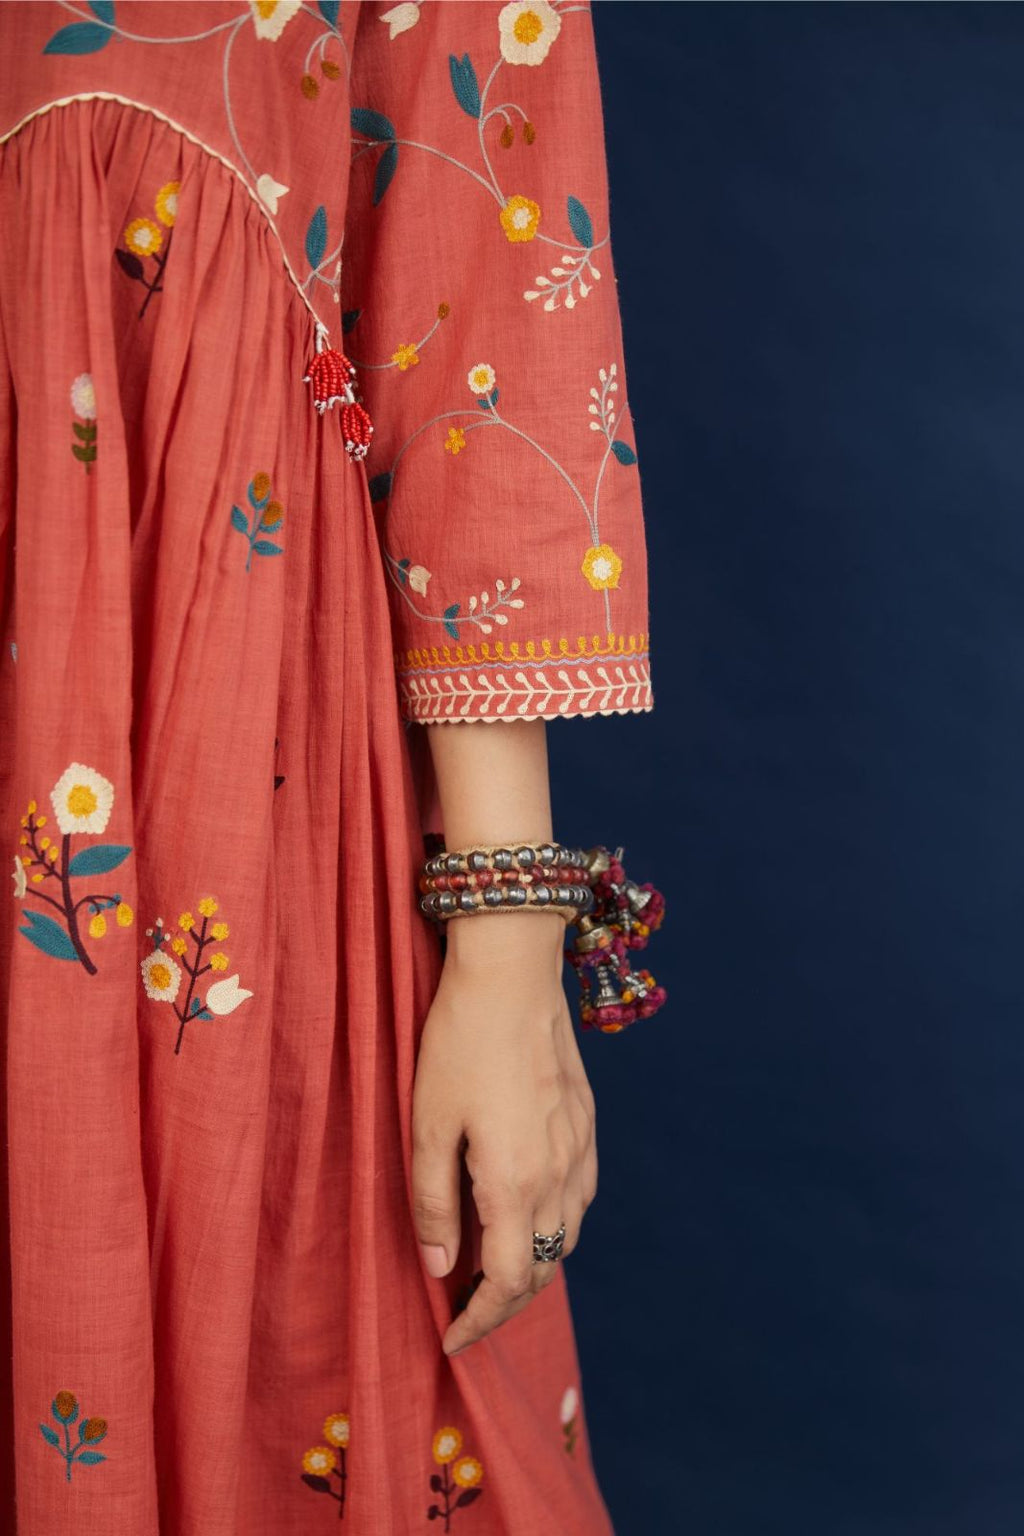 Handspun hand-woven cotton kurta with wavy empire waistline and gathers, highlighted with all-over multi colored thread embroidery, paired with Hand block printed cotton pants with ric-rac detailing at hem